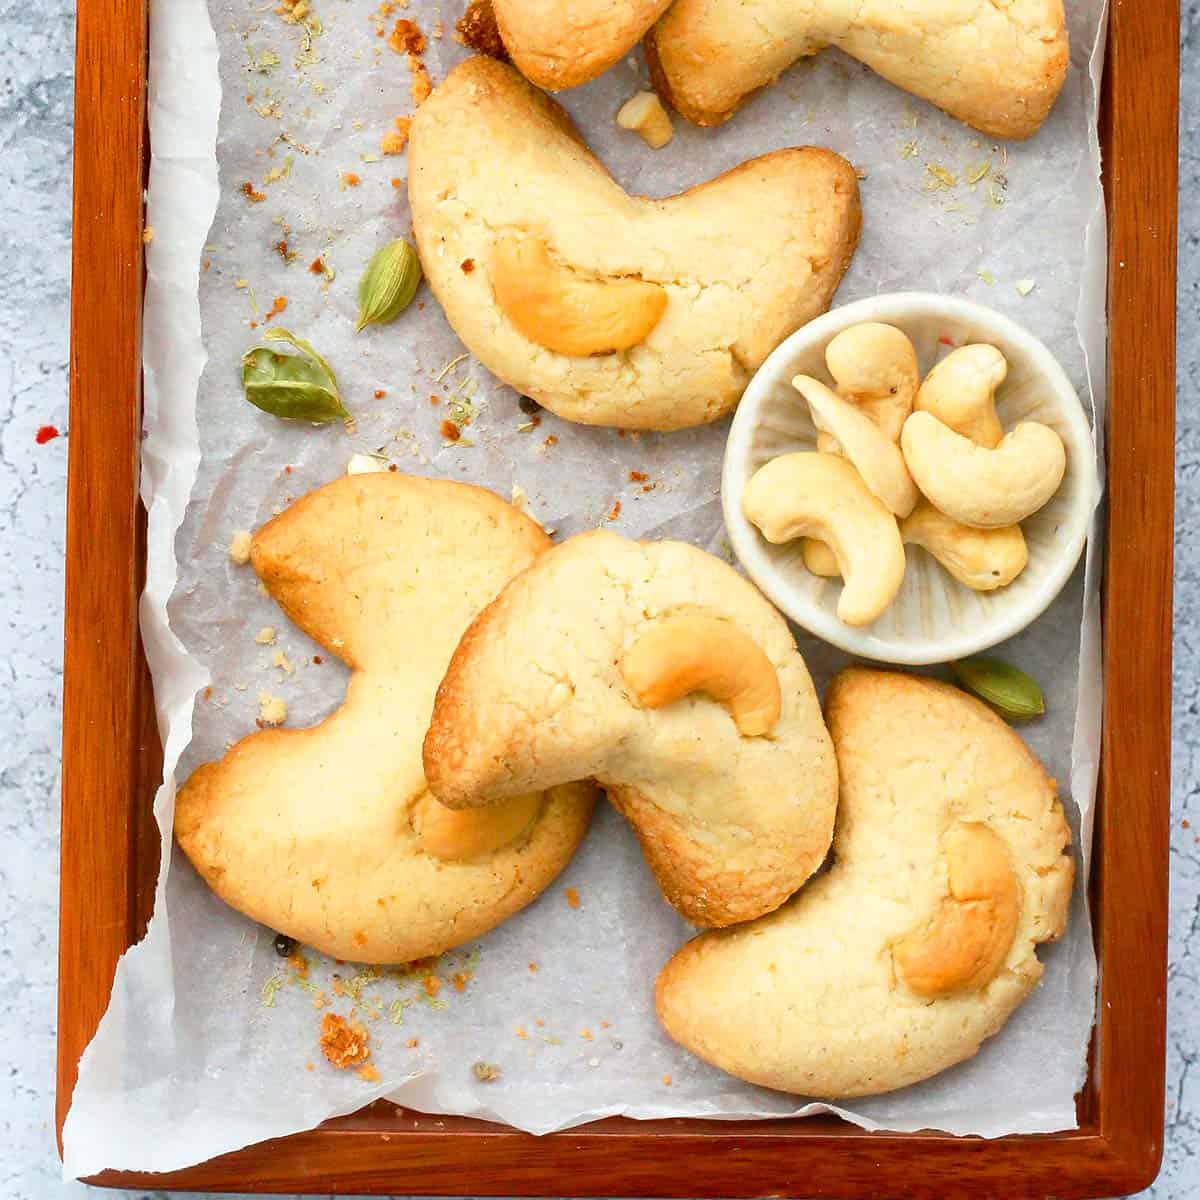 baked cashew cookies on a tray garnished with raw cashews.